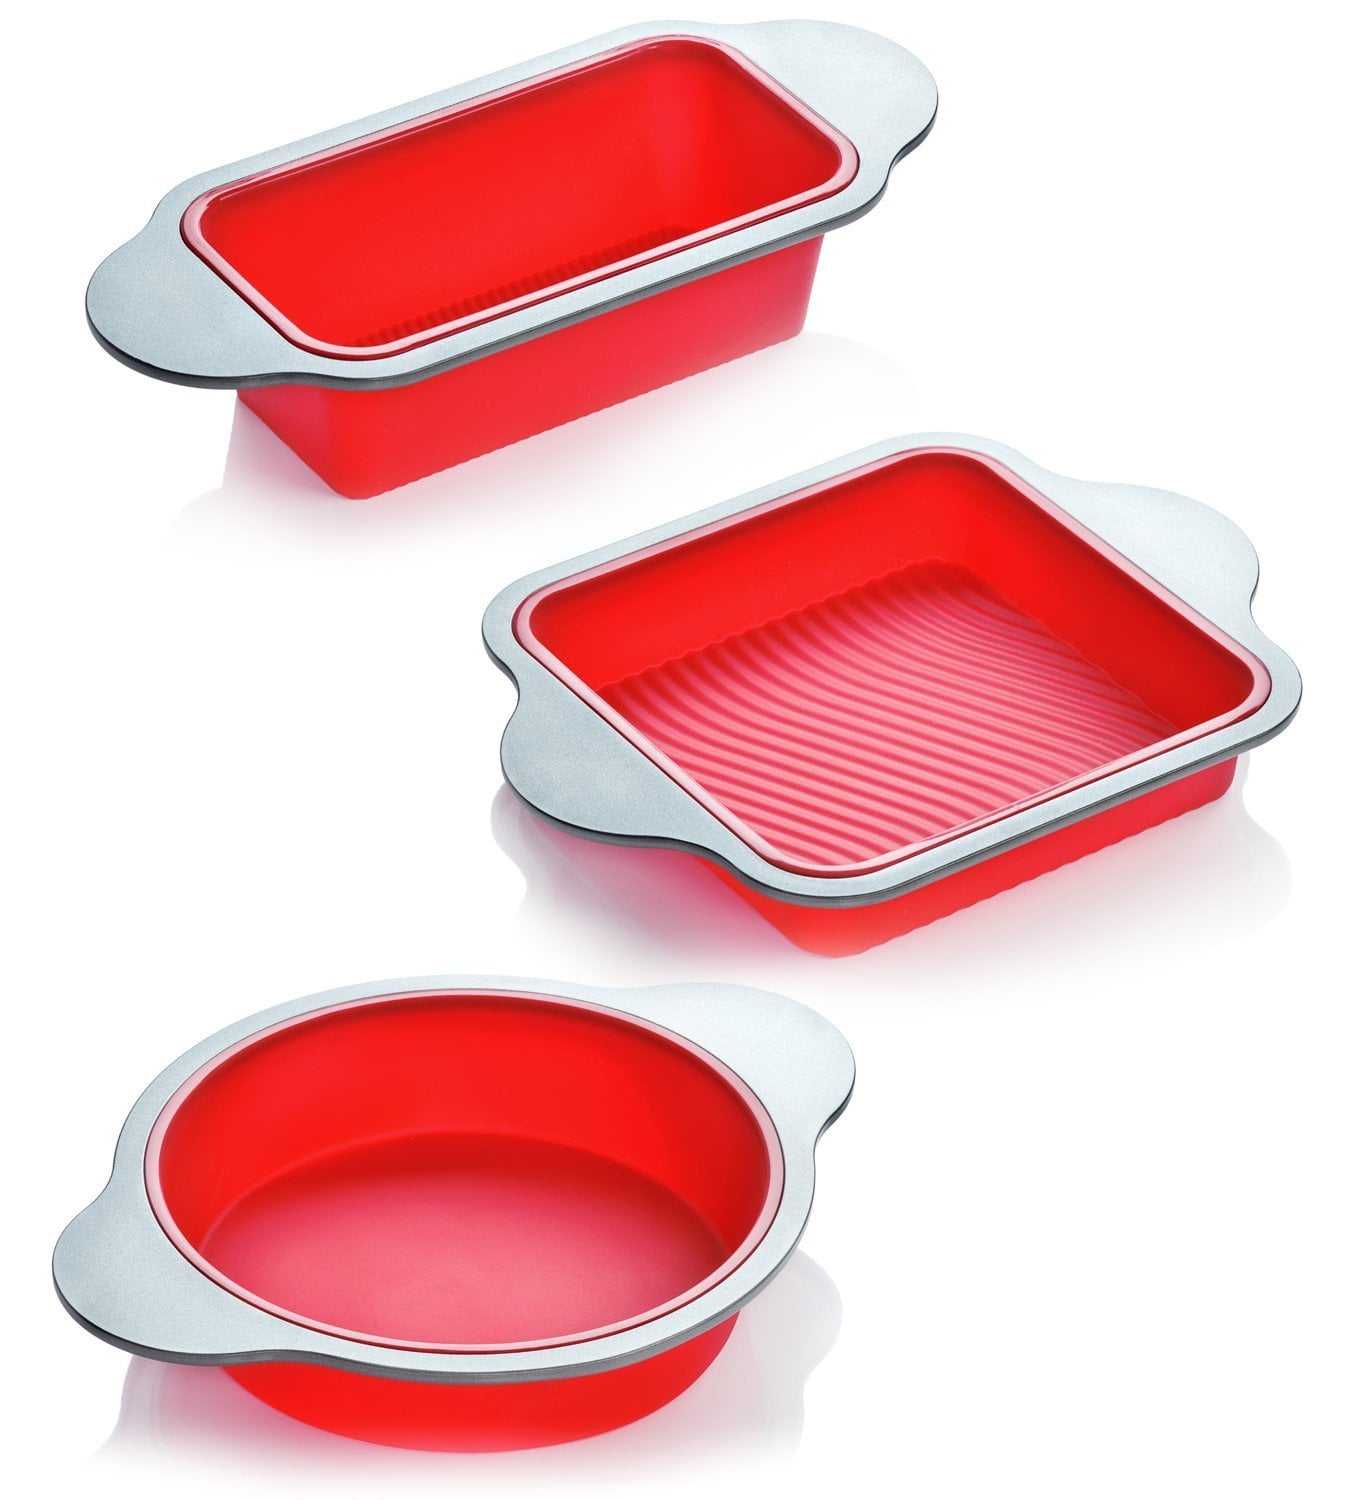 BESTONZON Silicone Cake Pan Silicone Cake Mold Nonstick Heat-Resistant Baking Pan Bakeware Mold Baking Tray for Cake Making Flower Shaped/Random Color